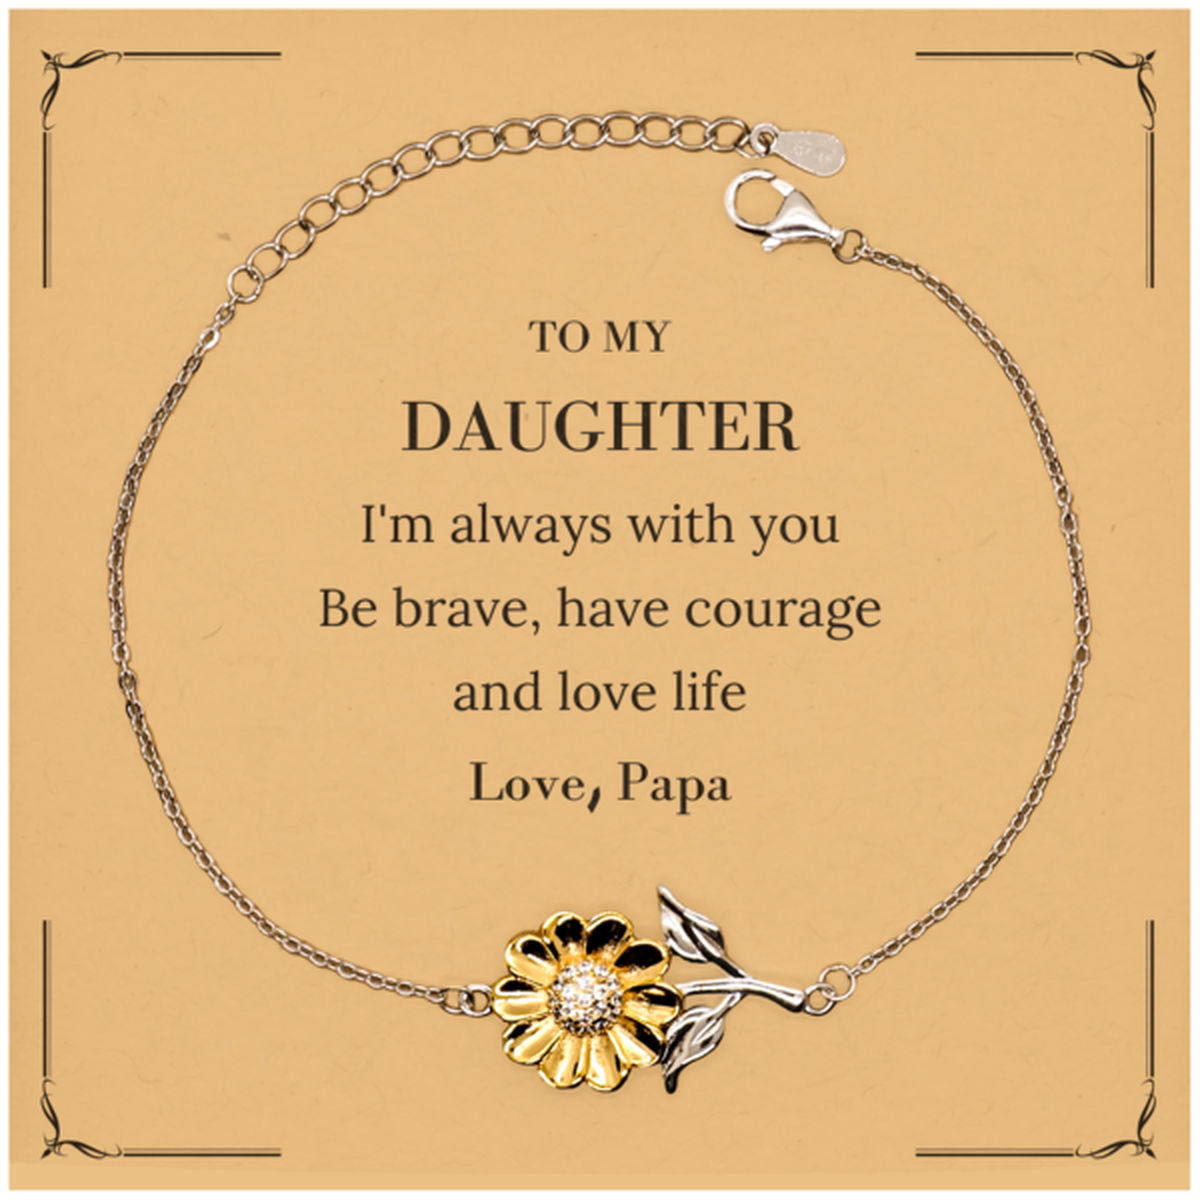 To My Daughter Gifts from Papa, Unique Sunflower Bracelet Inspirational Christmas Birthday Graduation Gifts for Daughter I'm always with you. Be brave, have courage and love life. Love, Papa